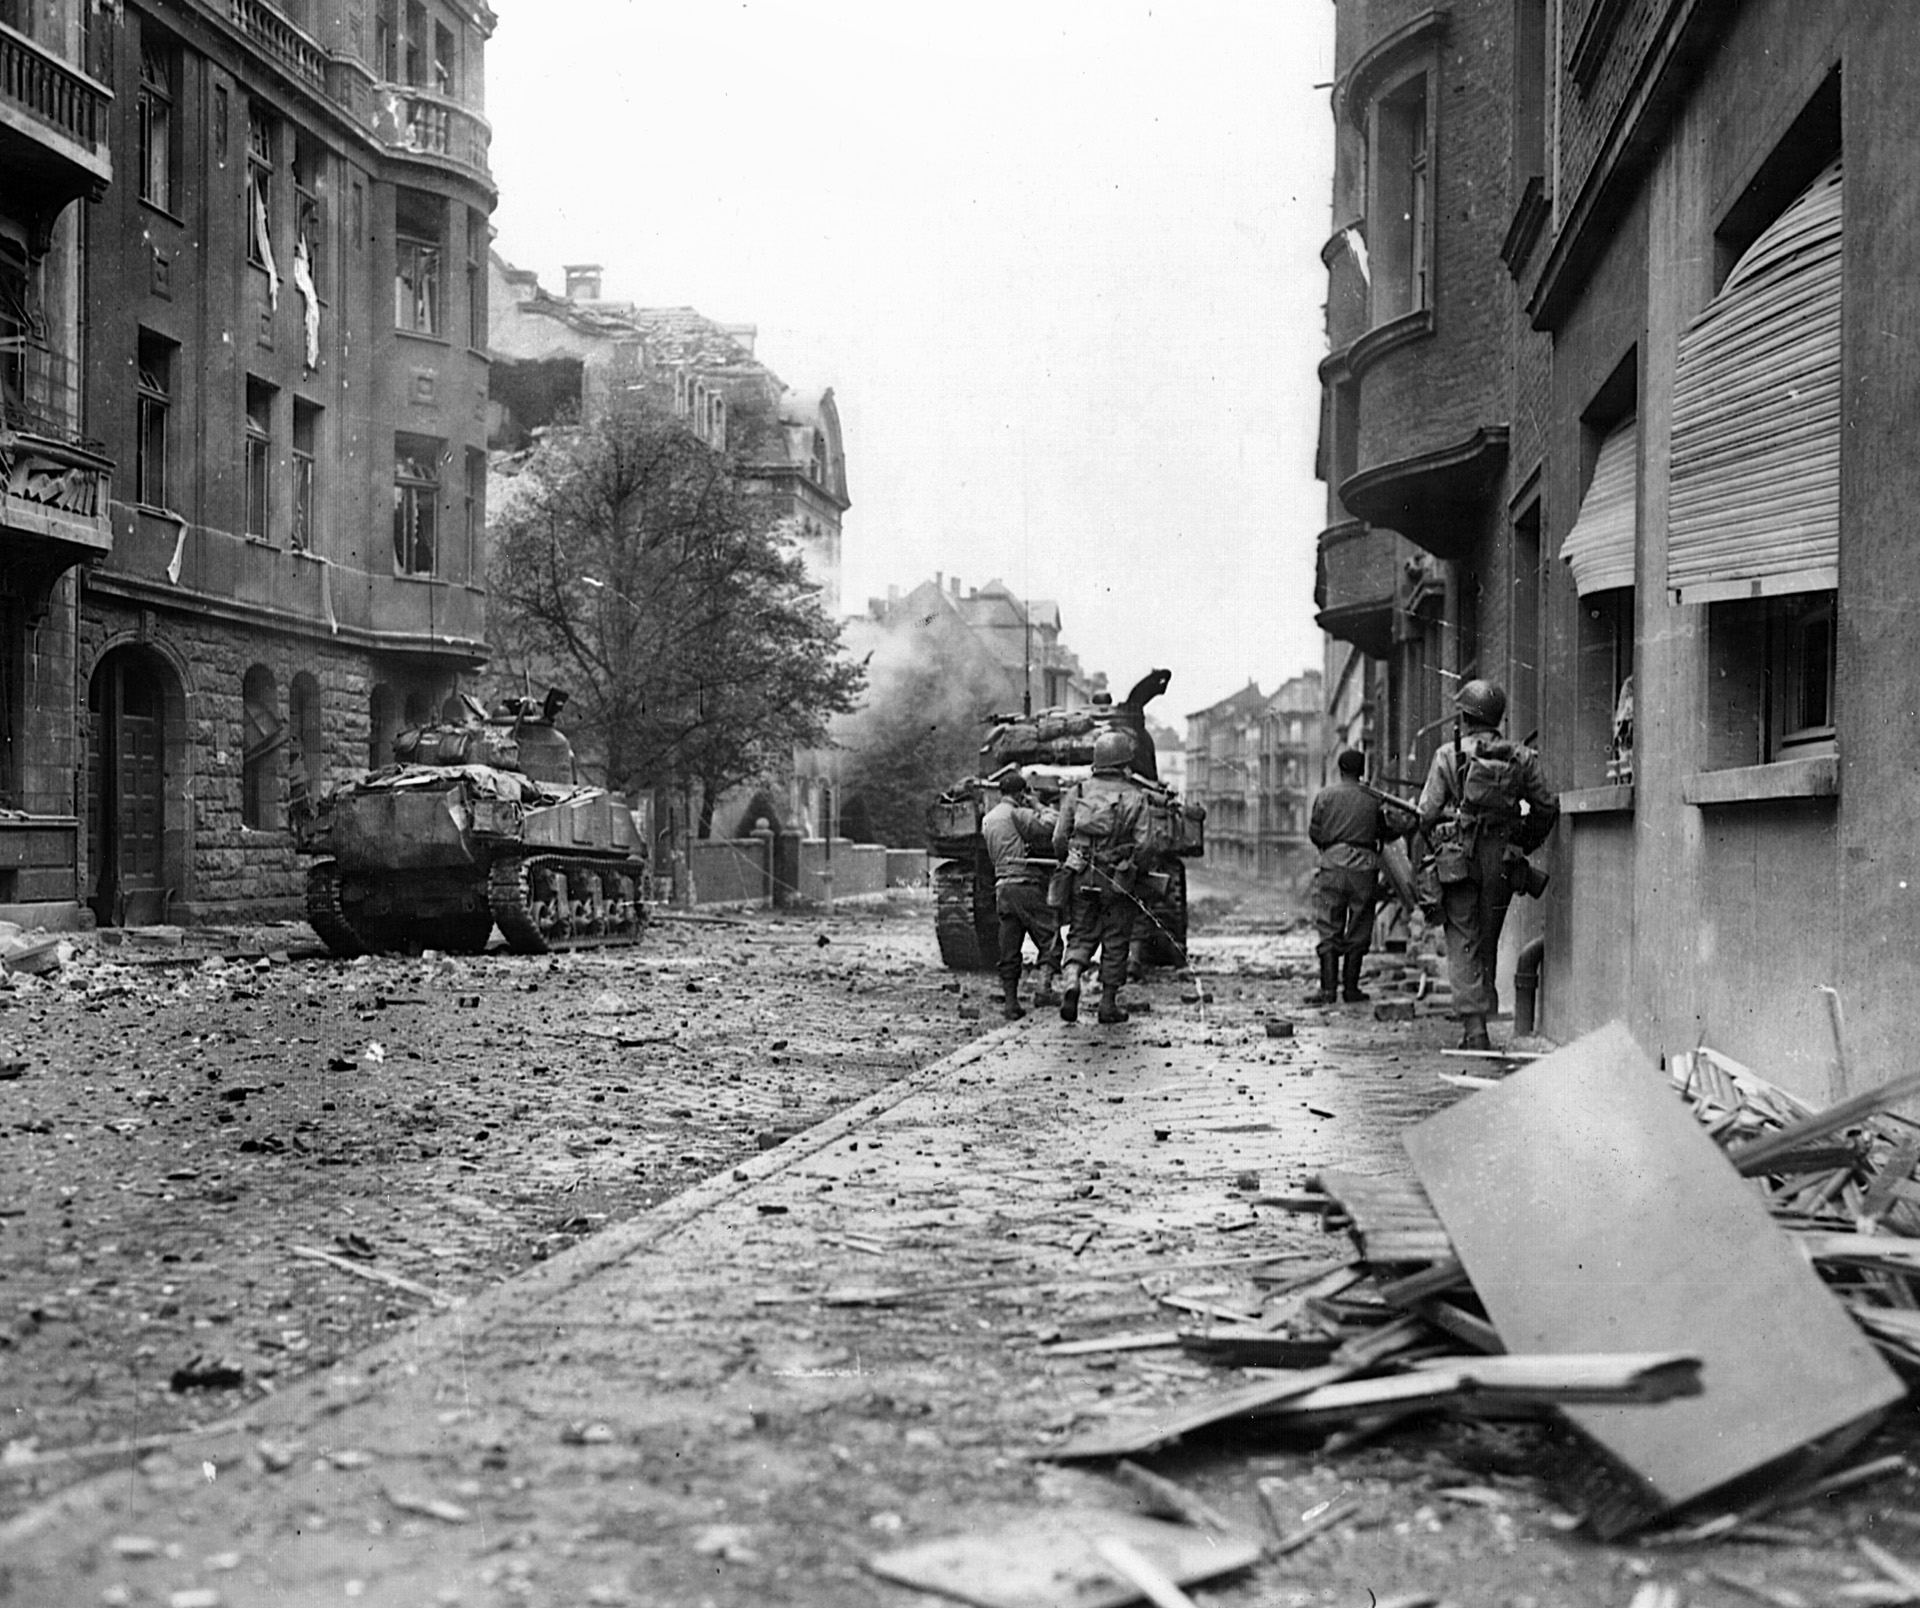 The Americans relied on tanks and and self-propelled guns to blast the Germans out of buildings transformed into strongpoints in Aachen. American tanks advance cautiously through a rubble-strewn street.